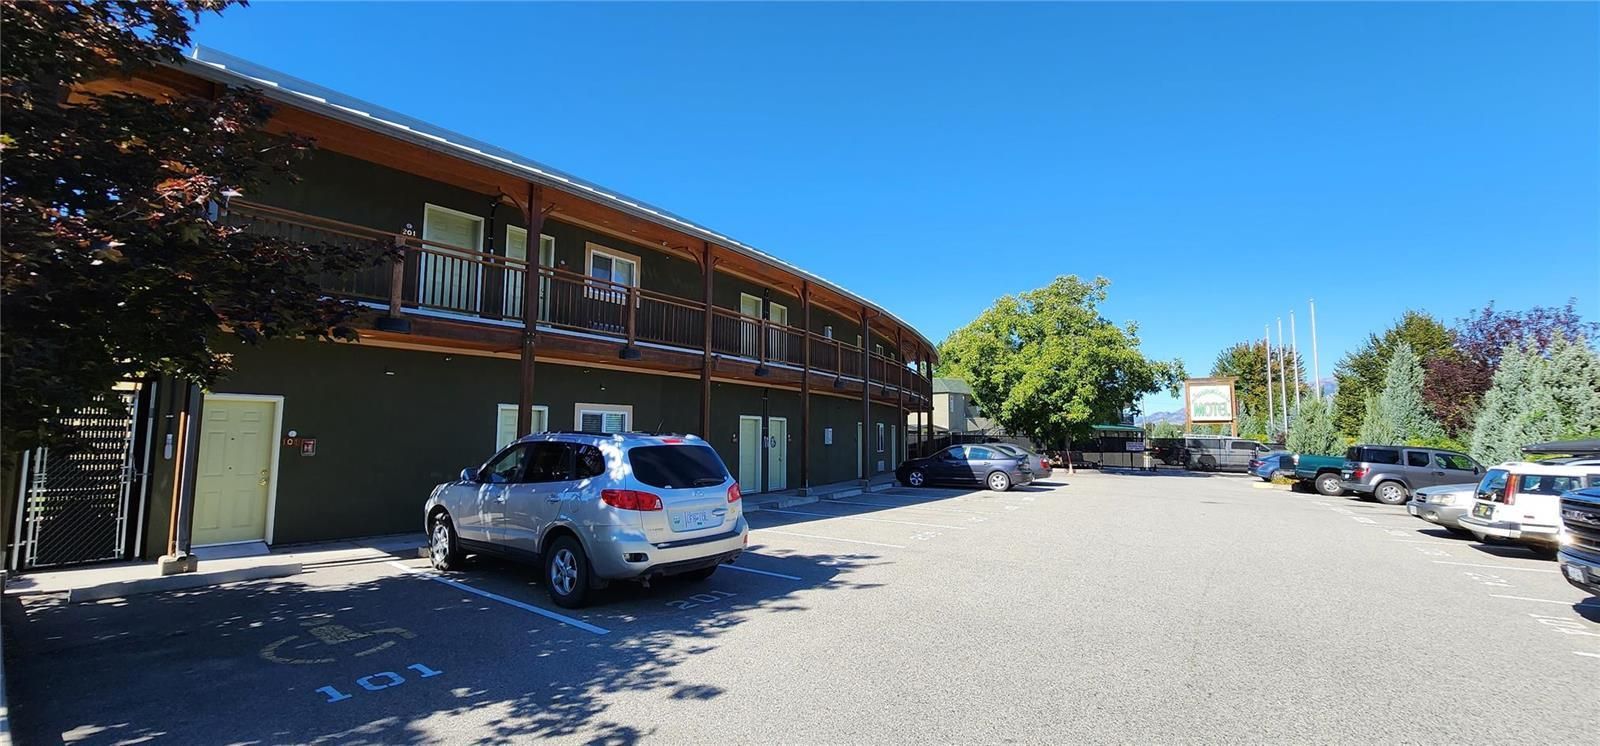 Main Photo: 6203 Willow Avenue, in Summerland: Multi-family for sale : MLS®# 10270040